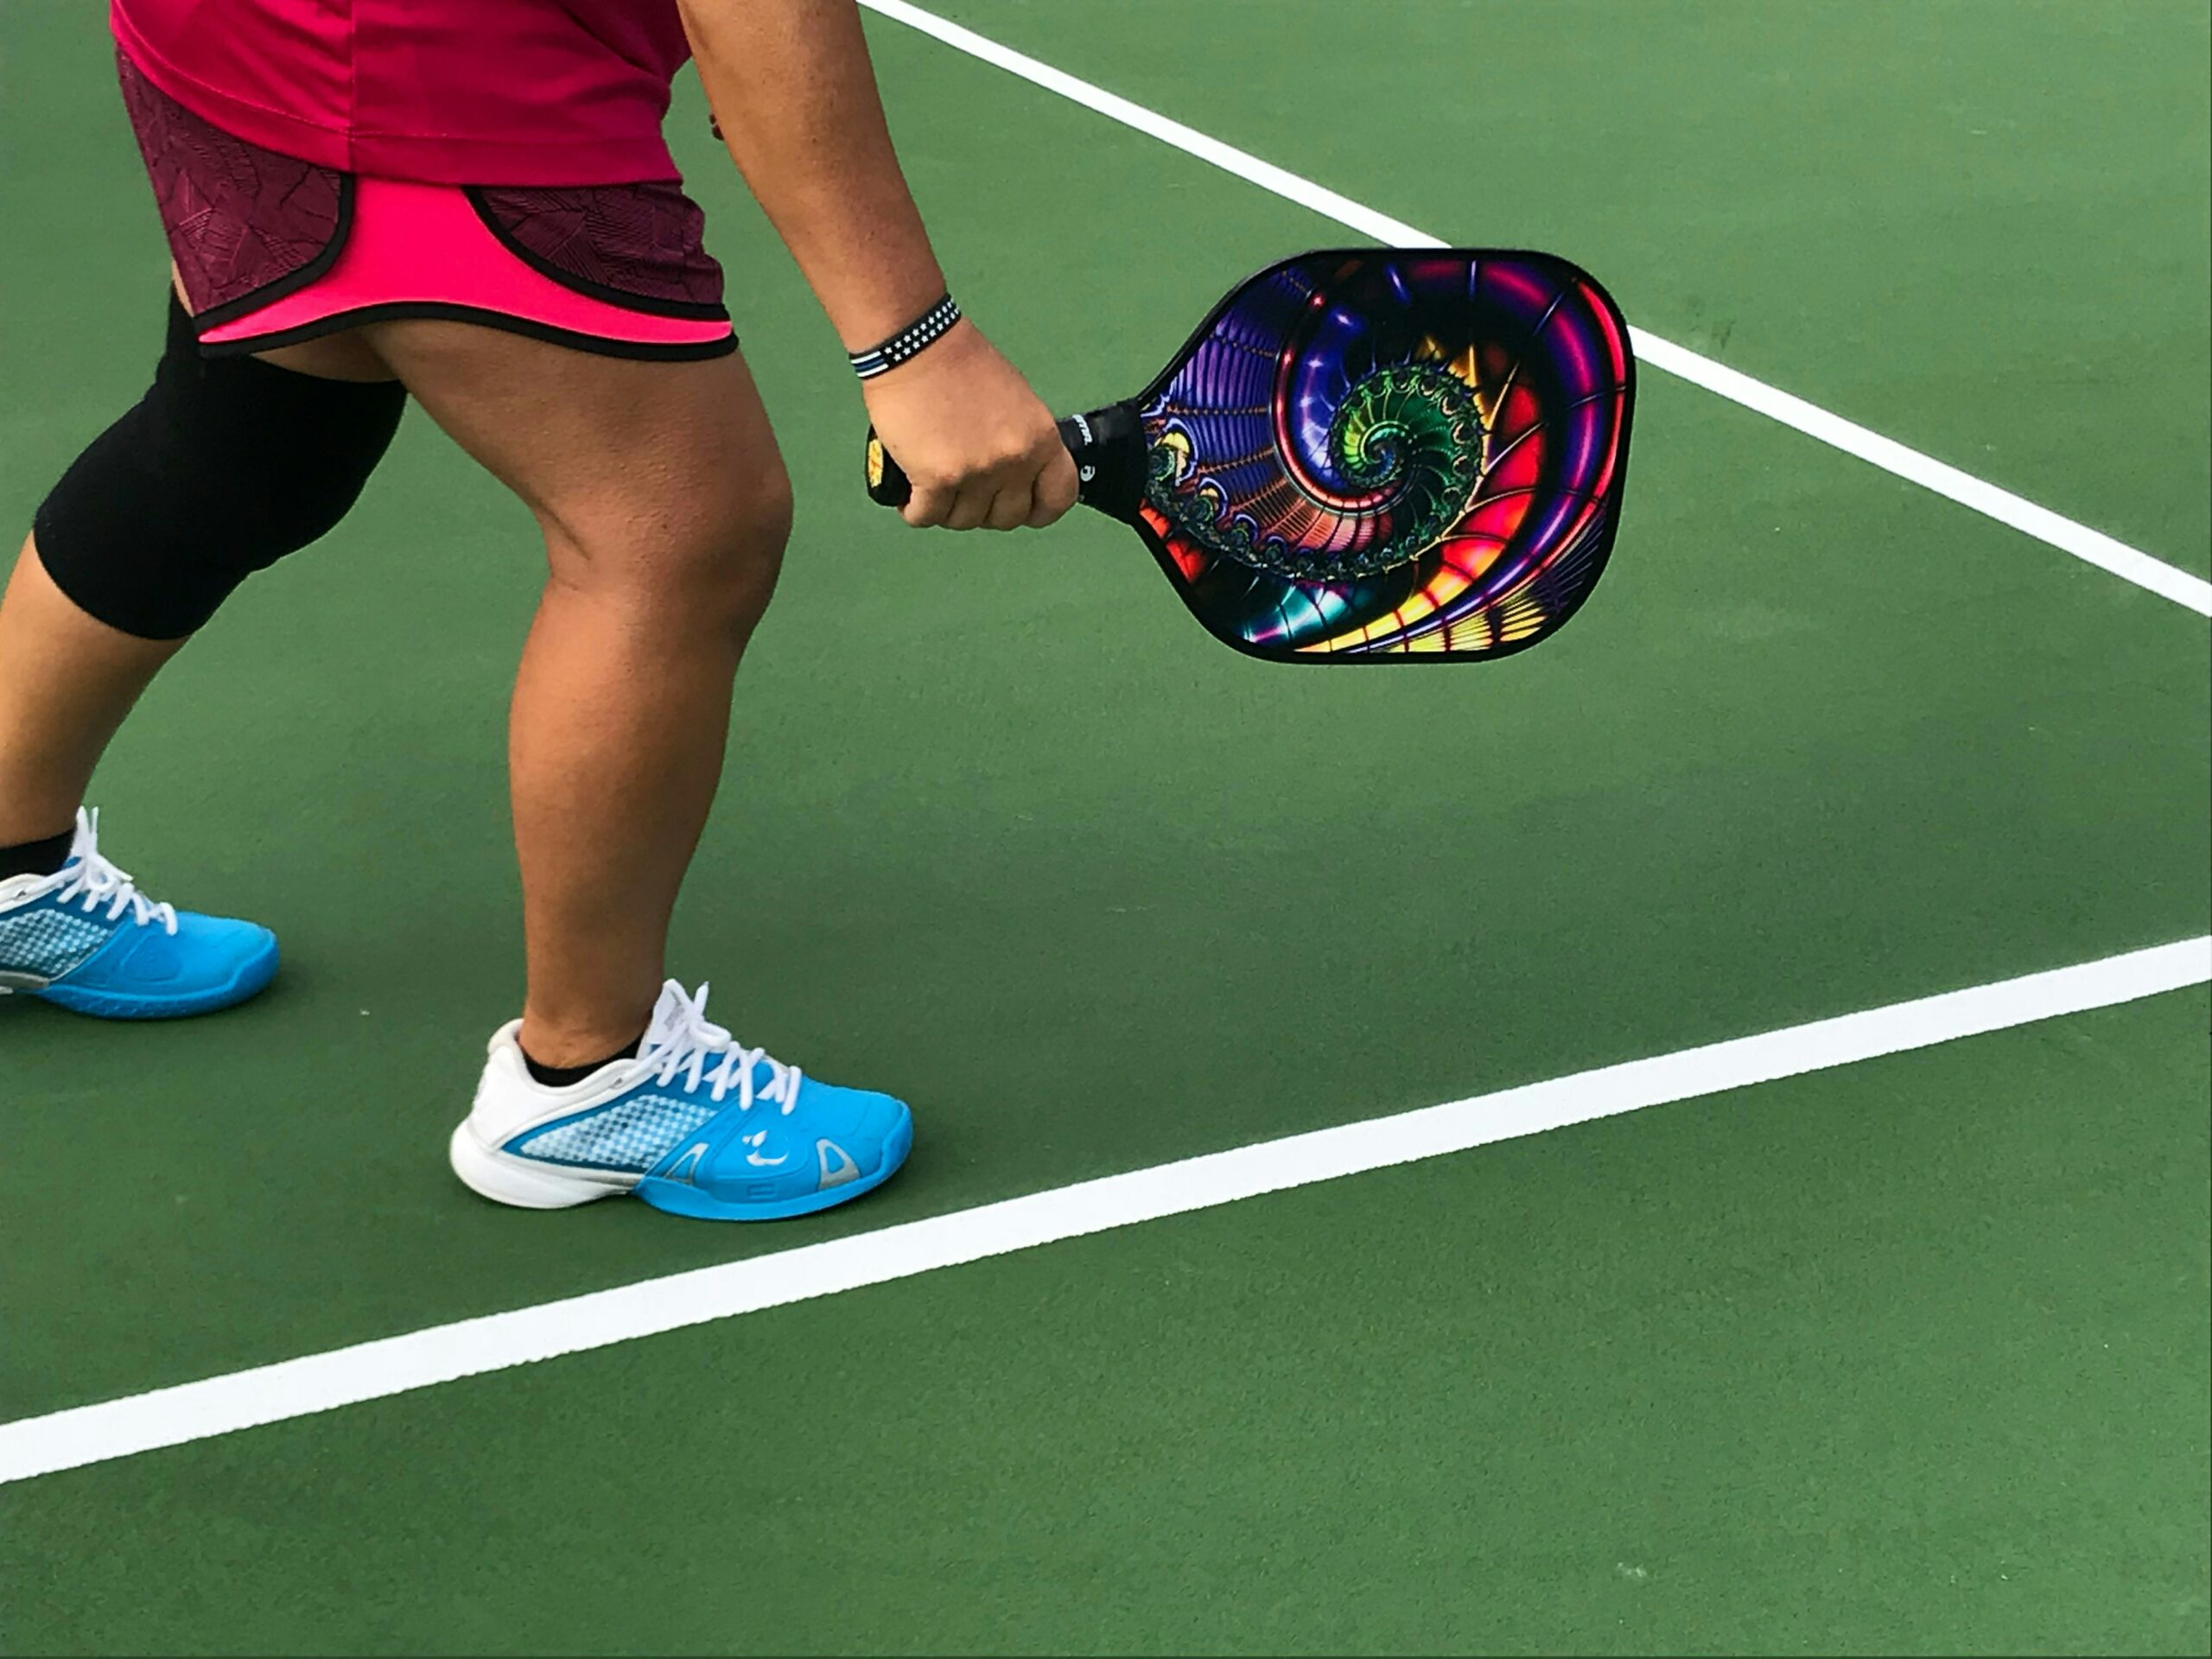 Pickleball paddles come in some wild colors!